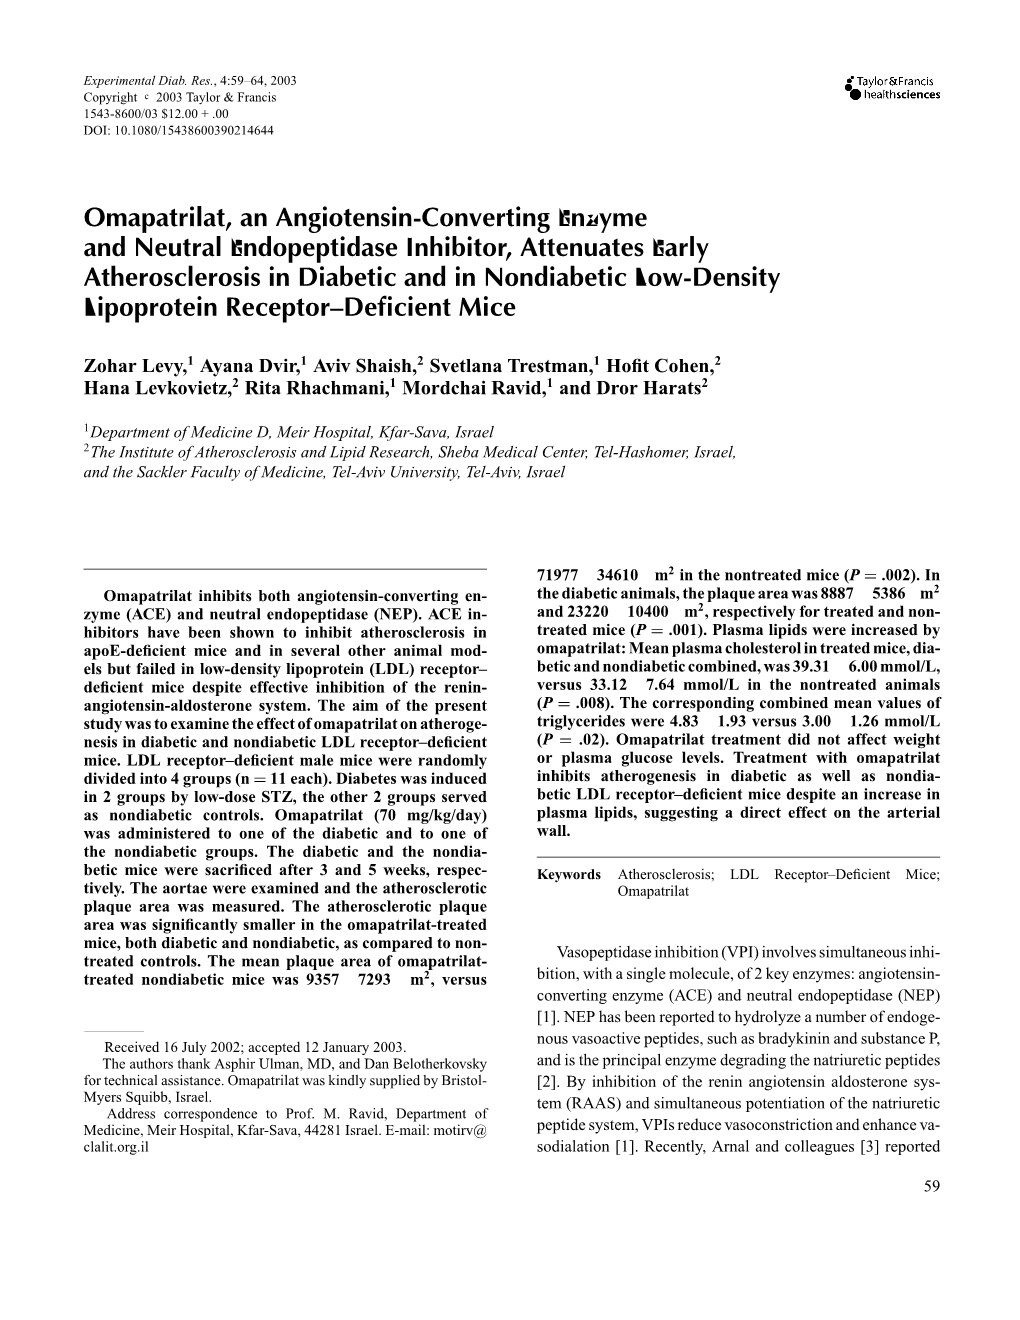 Omapatrilat, an Angiotensin-Converting Enzyme